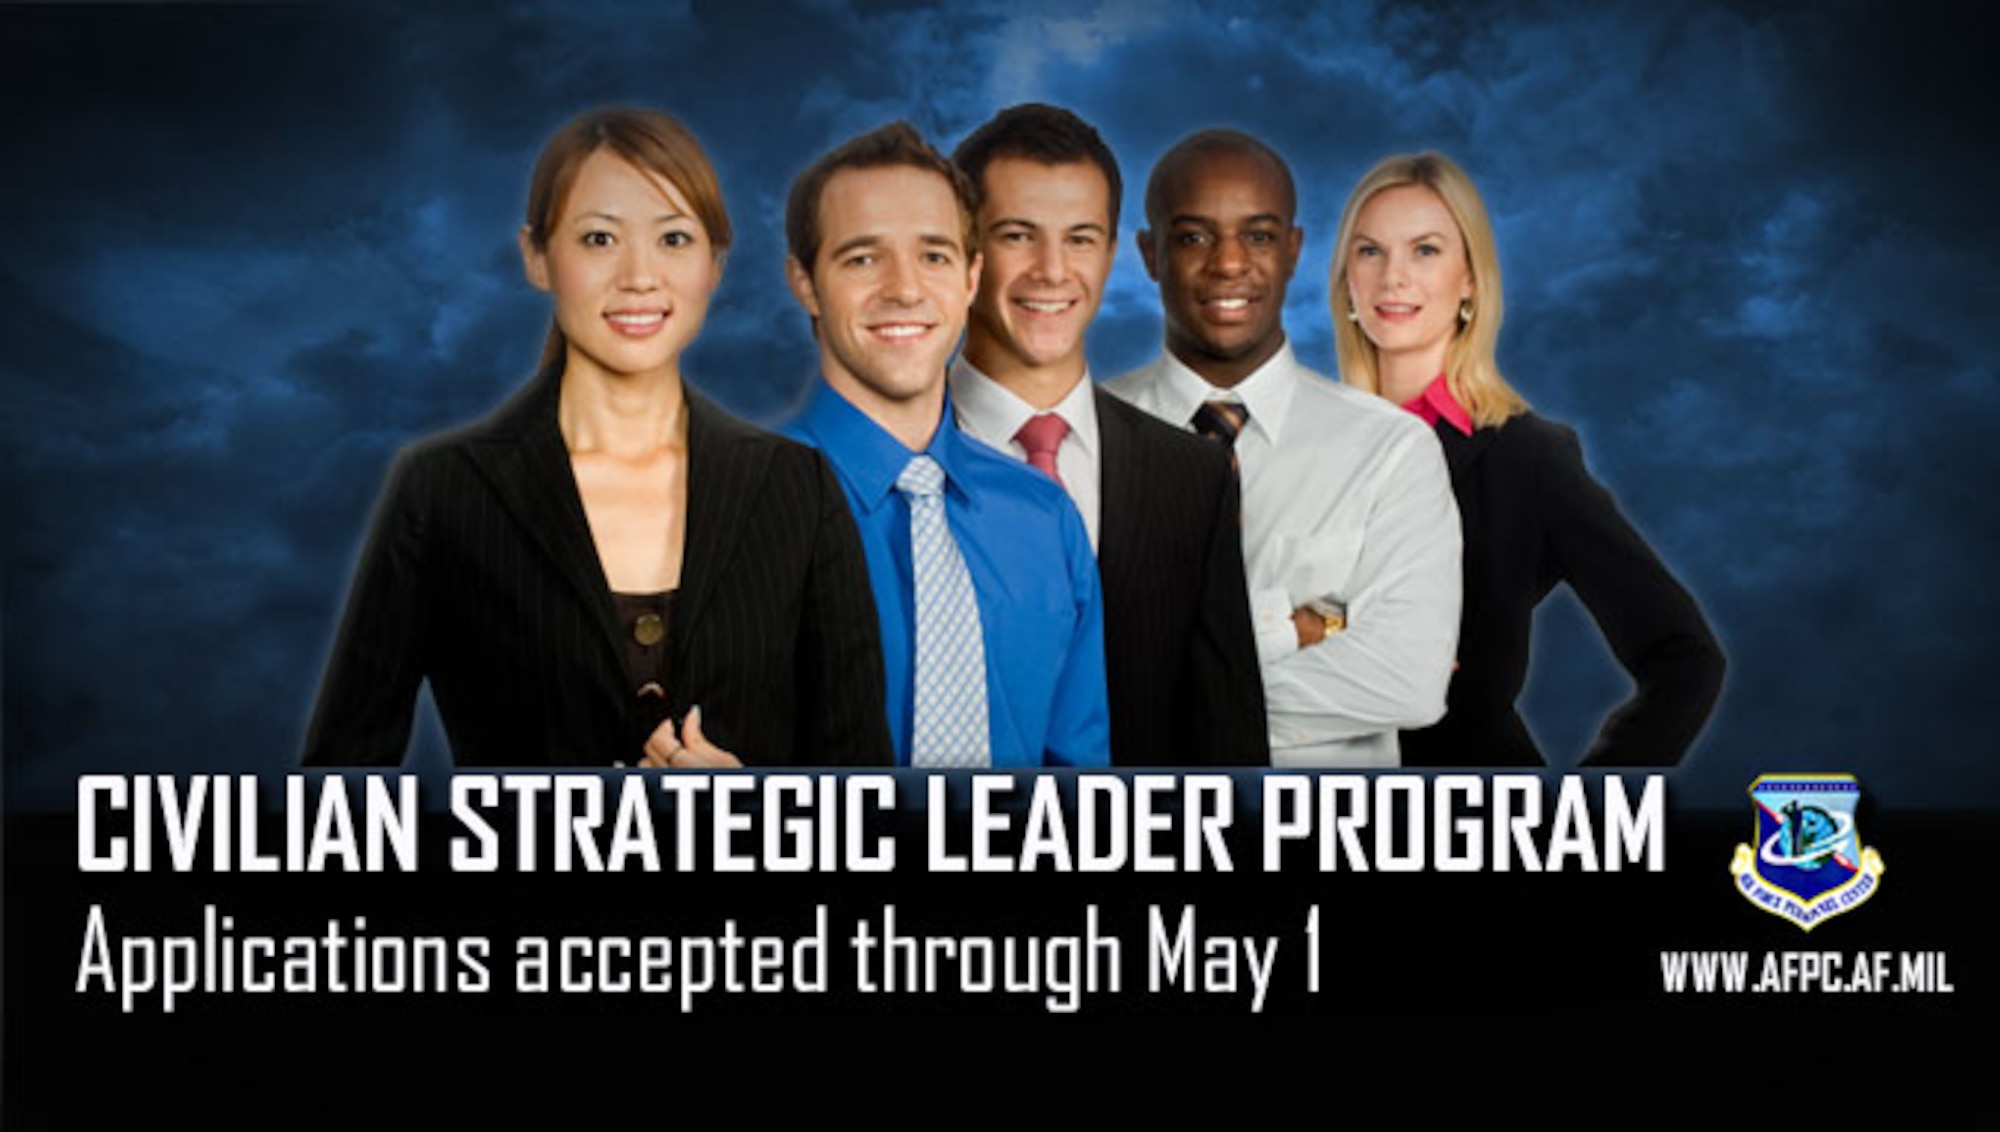 Civilian Strategic Leader Program applications accepted through May 1